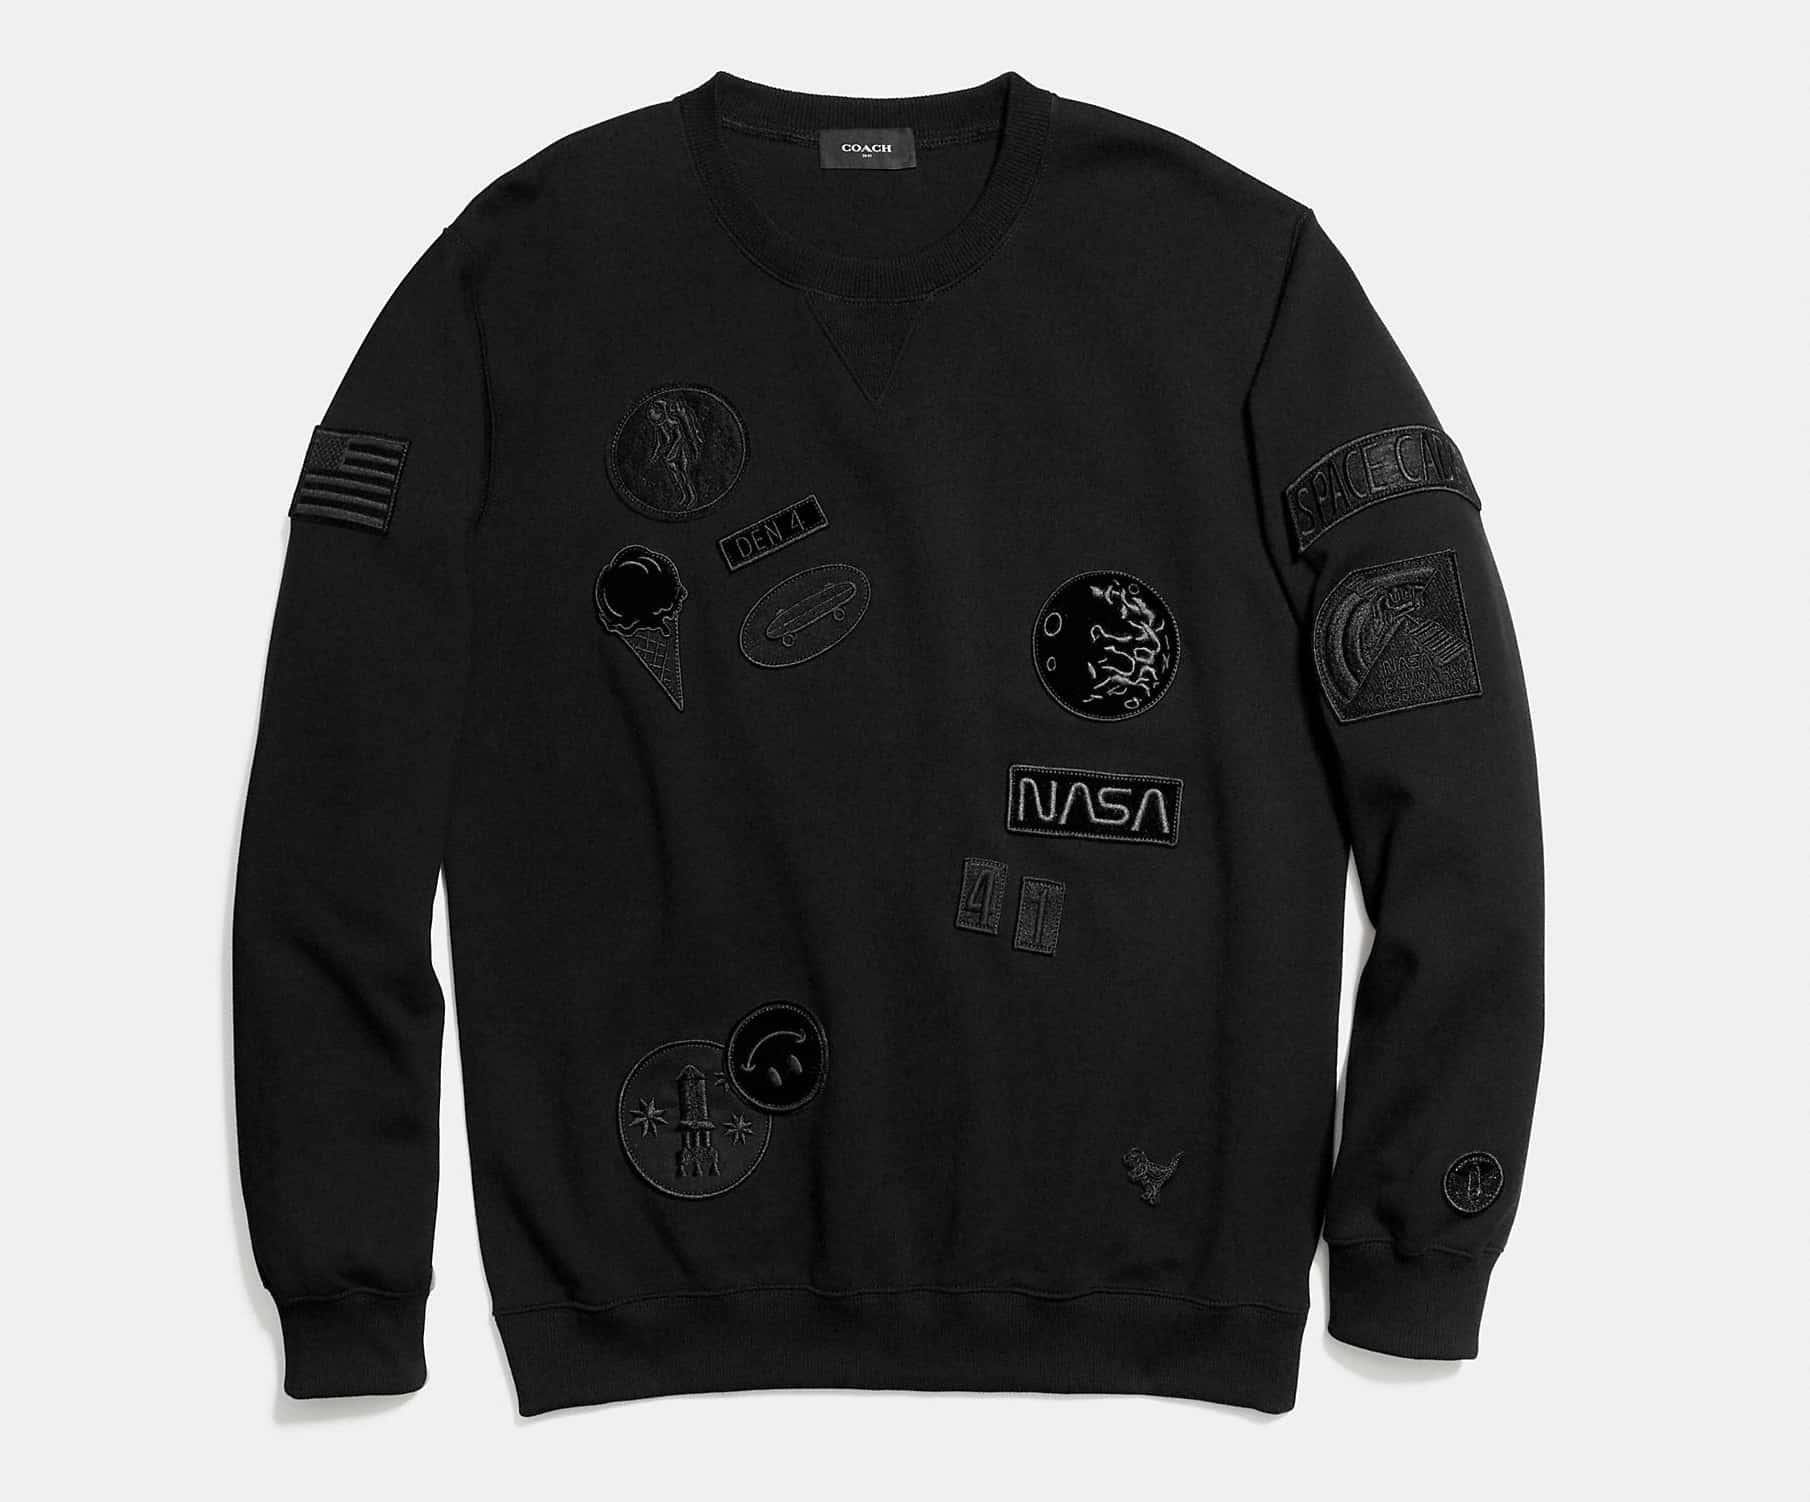 Coach Sweatshirt with Space Patches